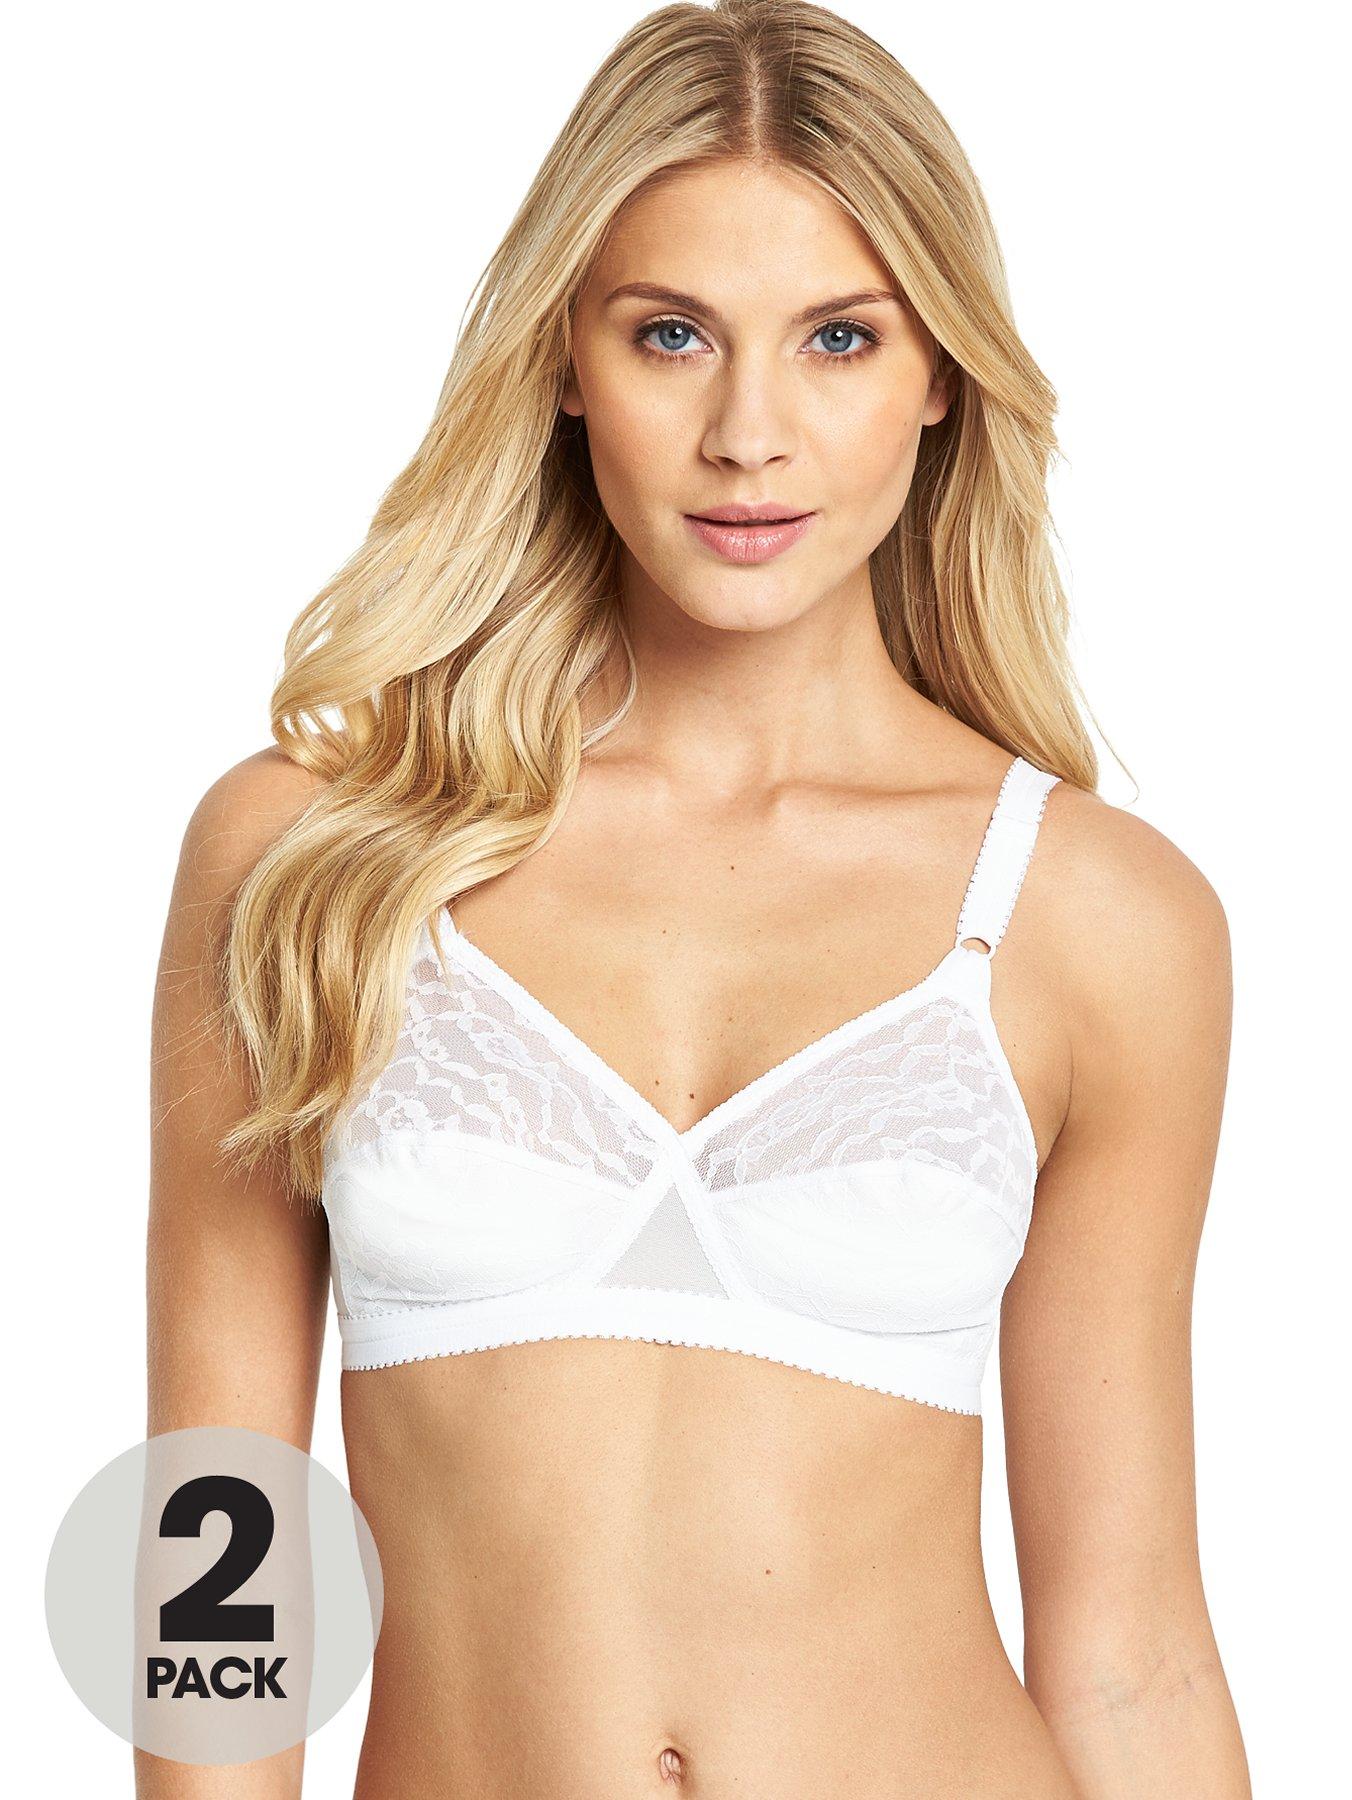 Playtex Cross Your Heart Soft Cup 2 Pack Bra Bigger Prices